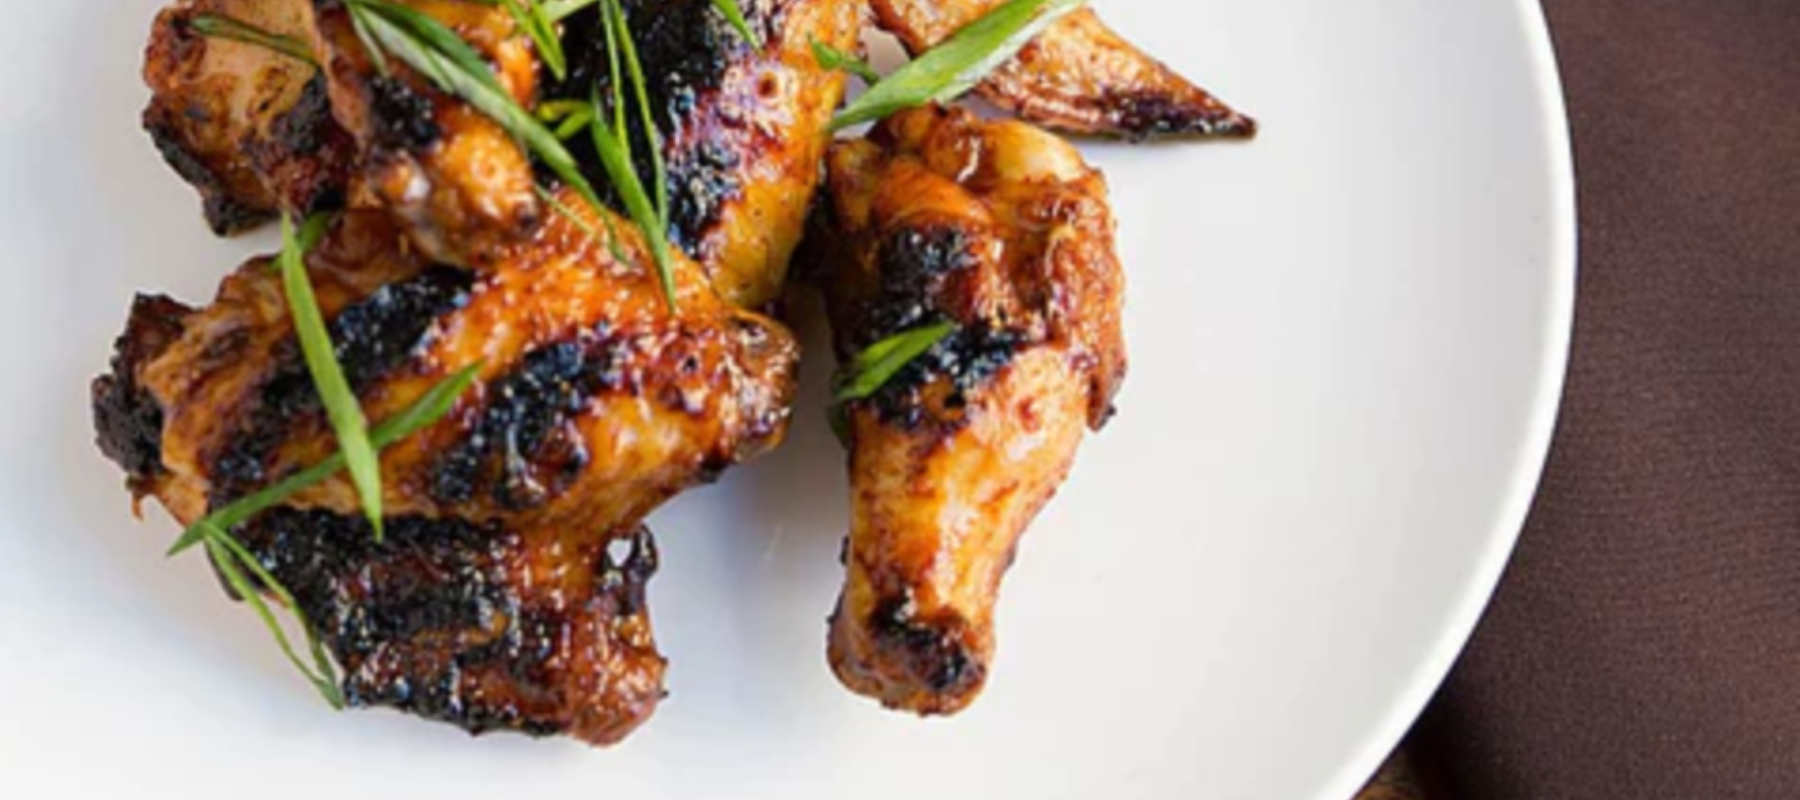 Chicken wings with chives and blue cheese dressing